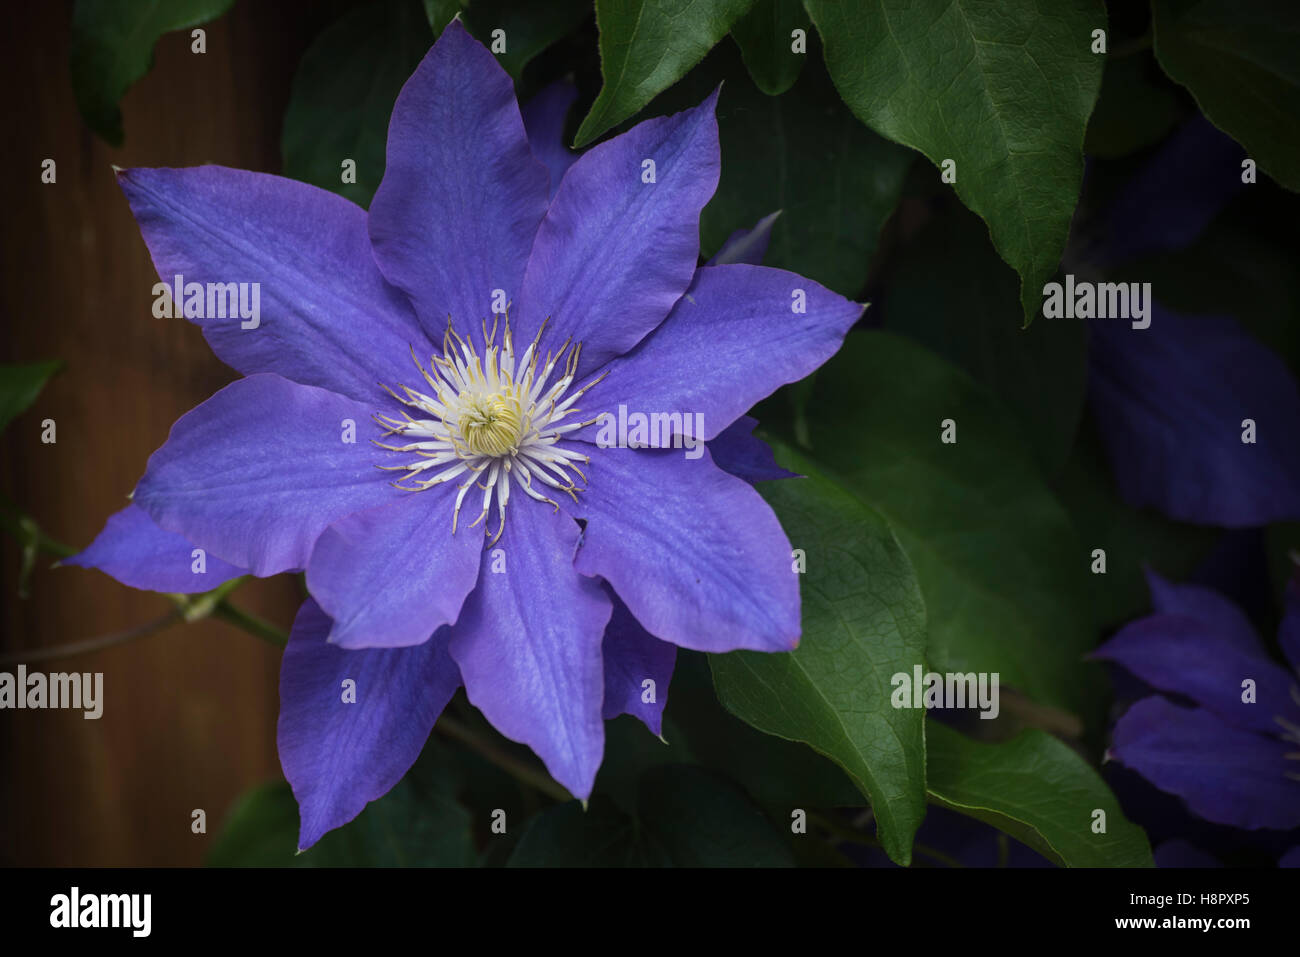 Beautiful clematis in bloom Stock Photo